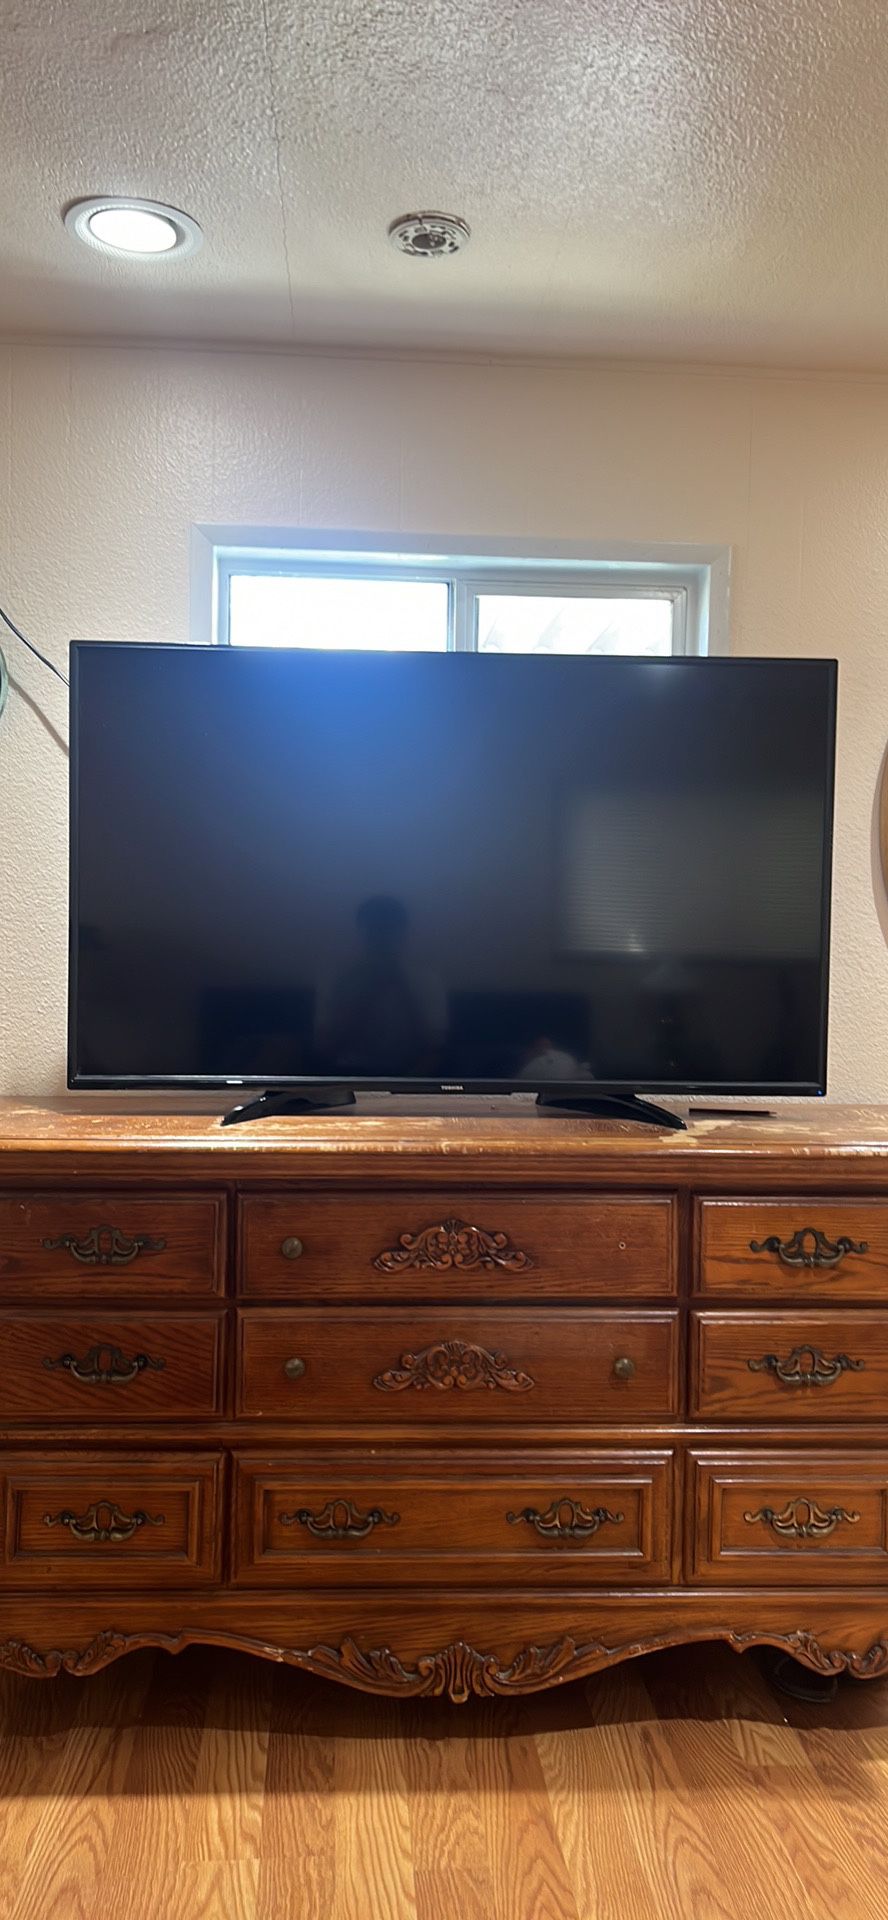 BEST OFFER 4K 55 Inch Toshiba Smart TV - can maybe do delivery